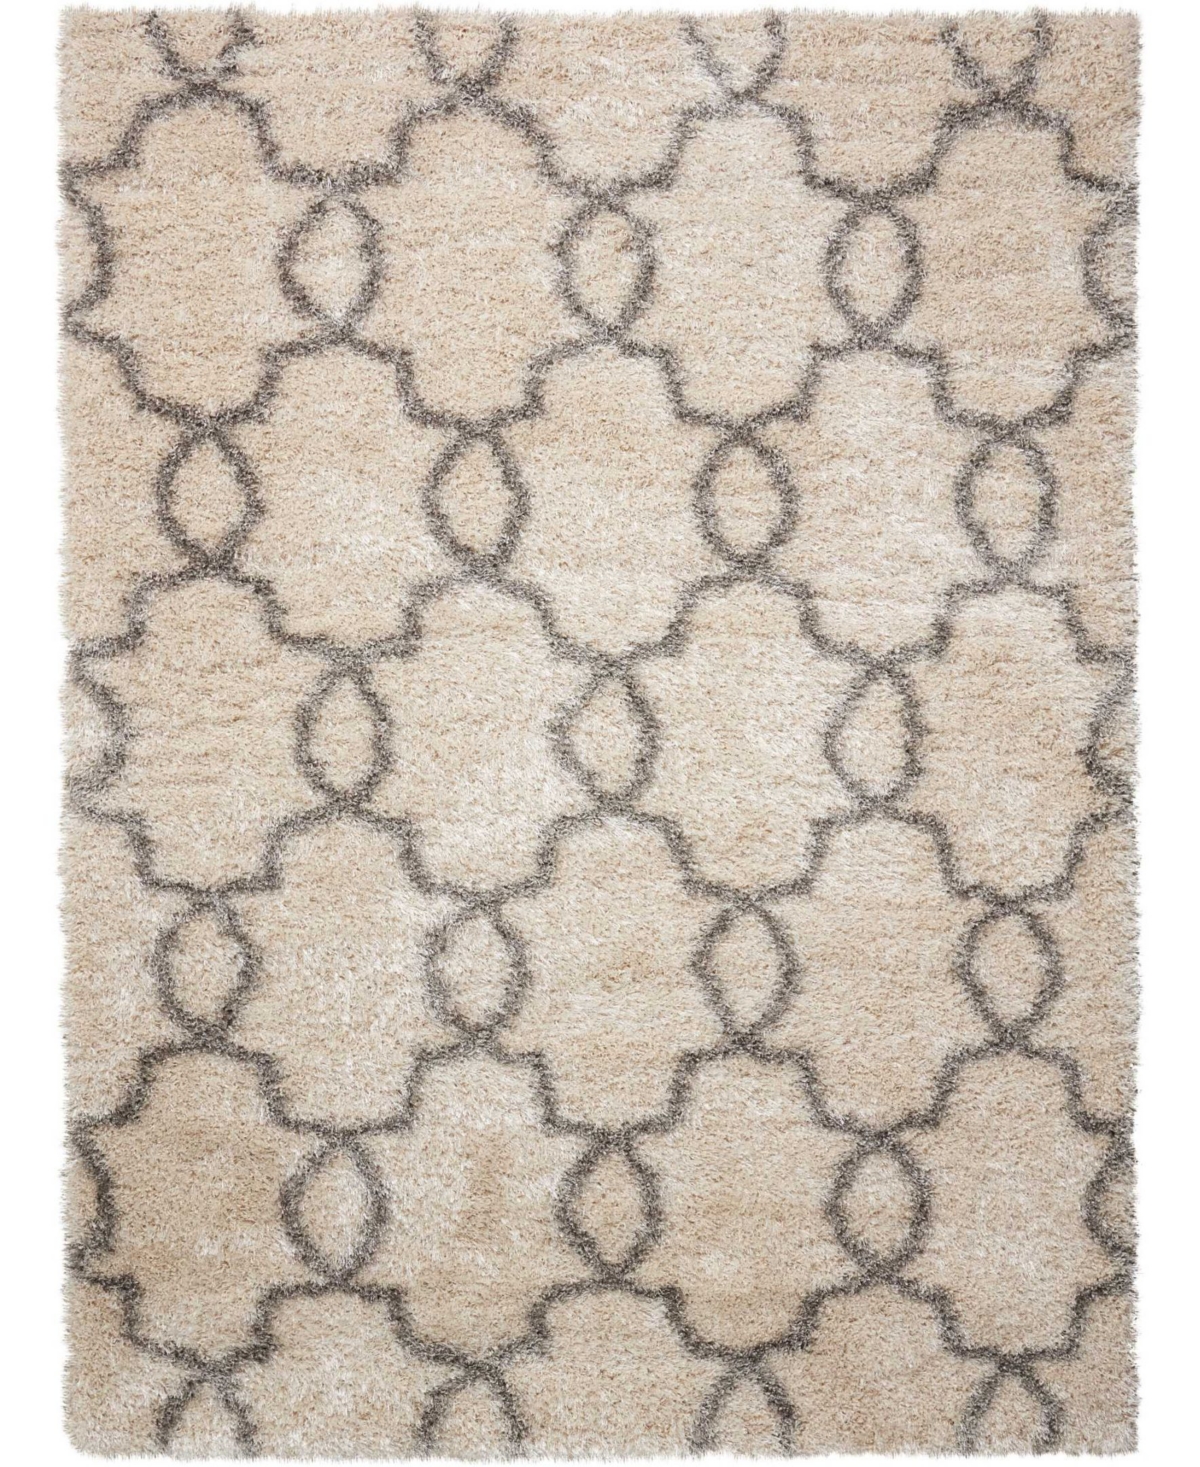 Long Street Looms Freed FRE2 Bone 5'3in x 7'3in Area Rug - White shade